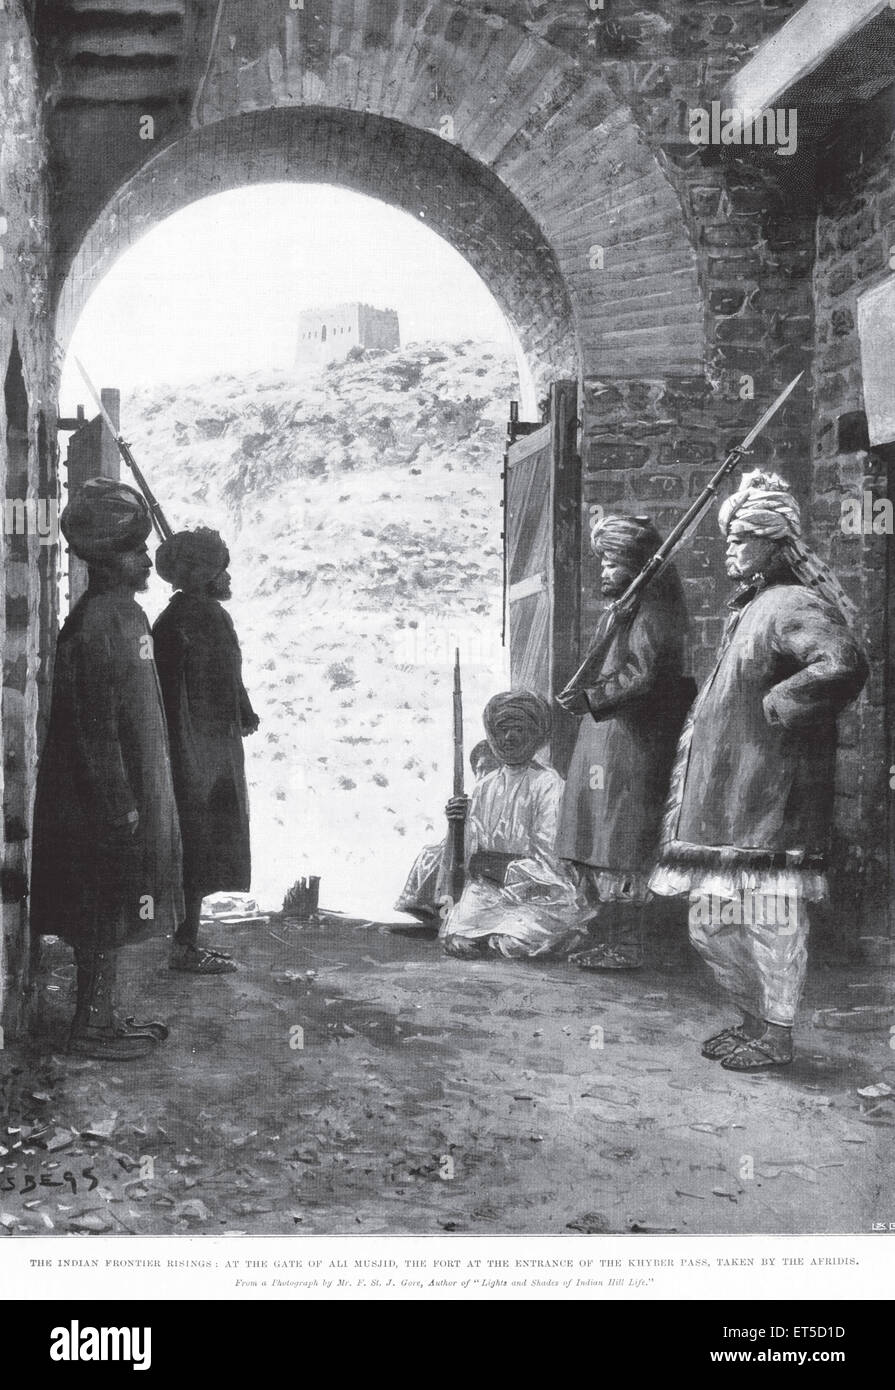 North West & Kashmir Indian frontier risings  at gate of Ali Musjid the fort at entrance of Khyber pass taken by the Afridis Stock Photo